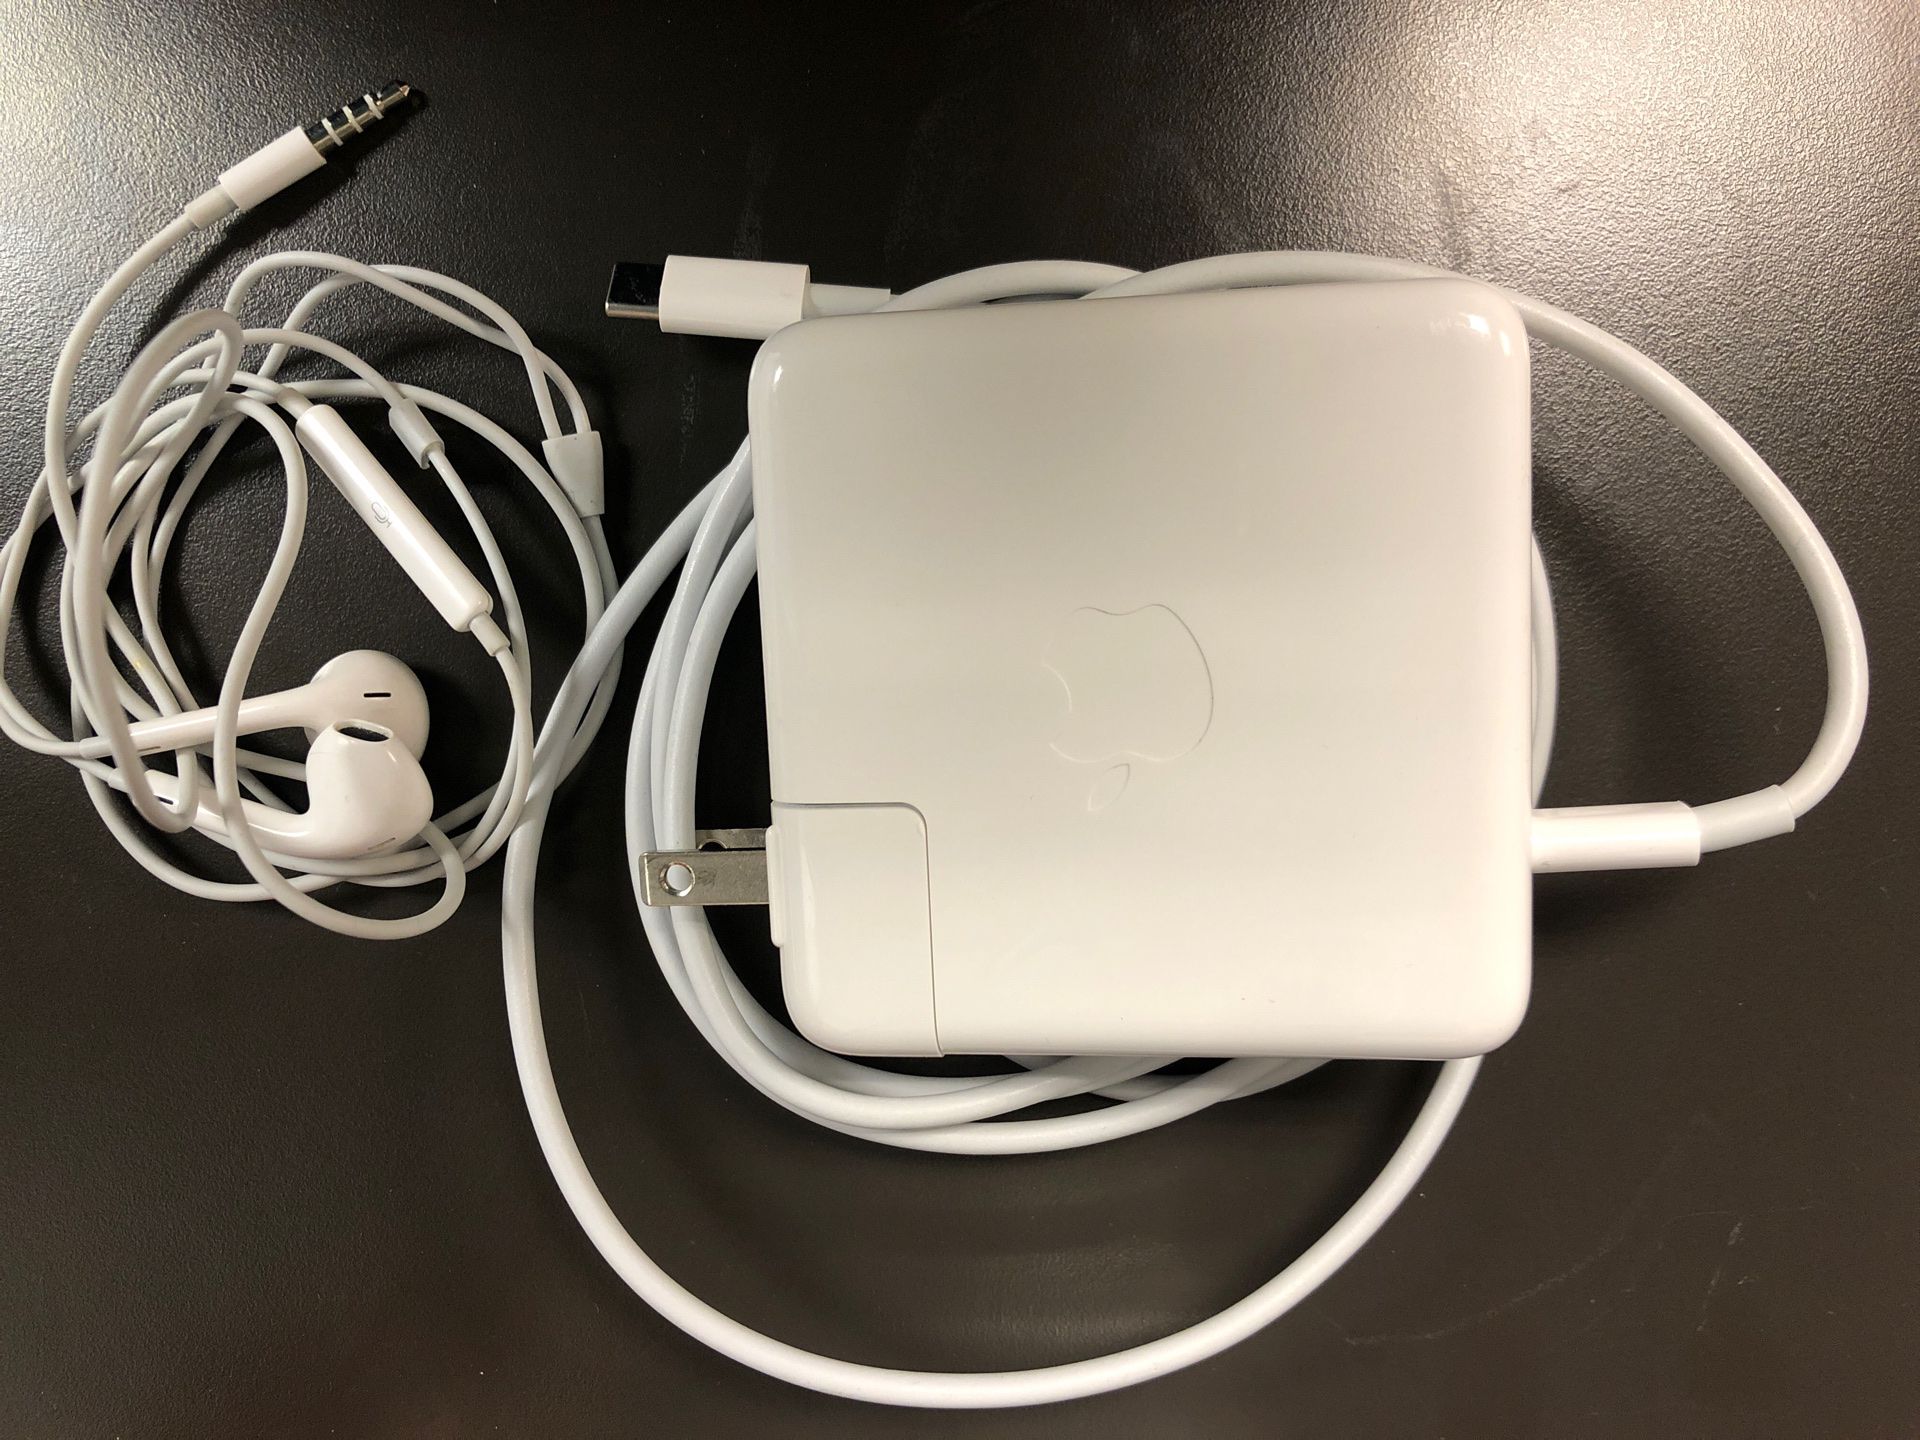 Apple Charger and Headphones